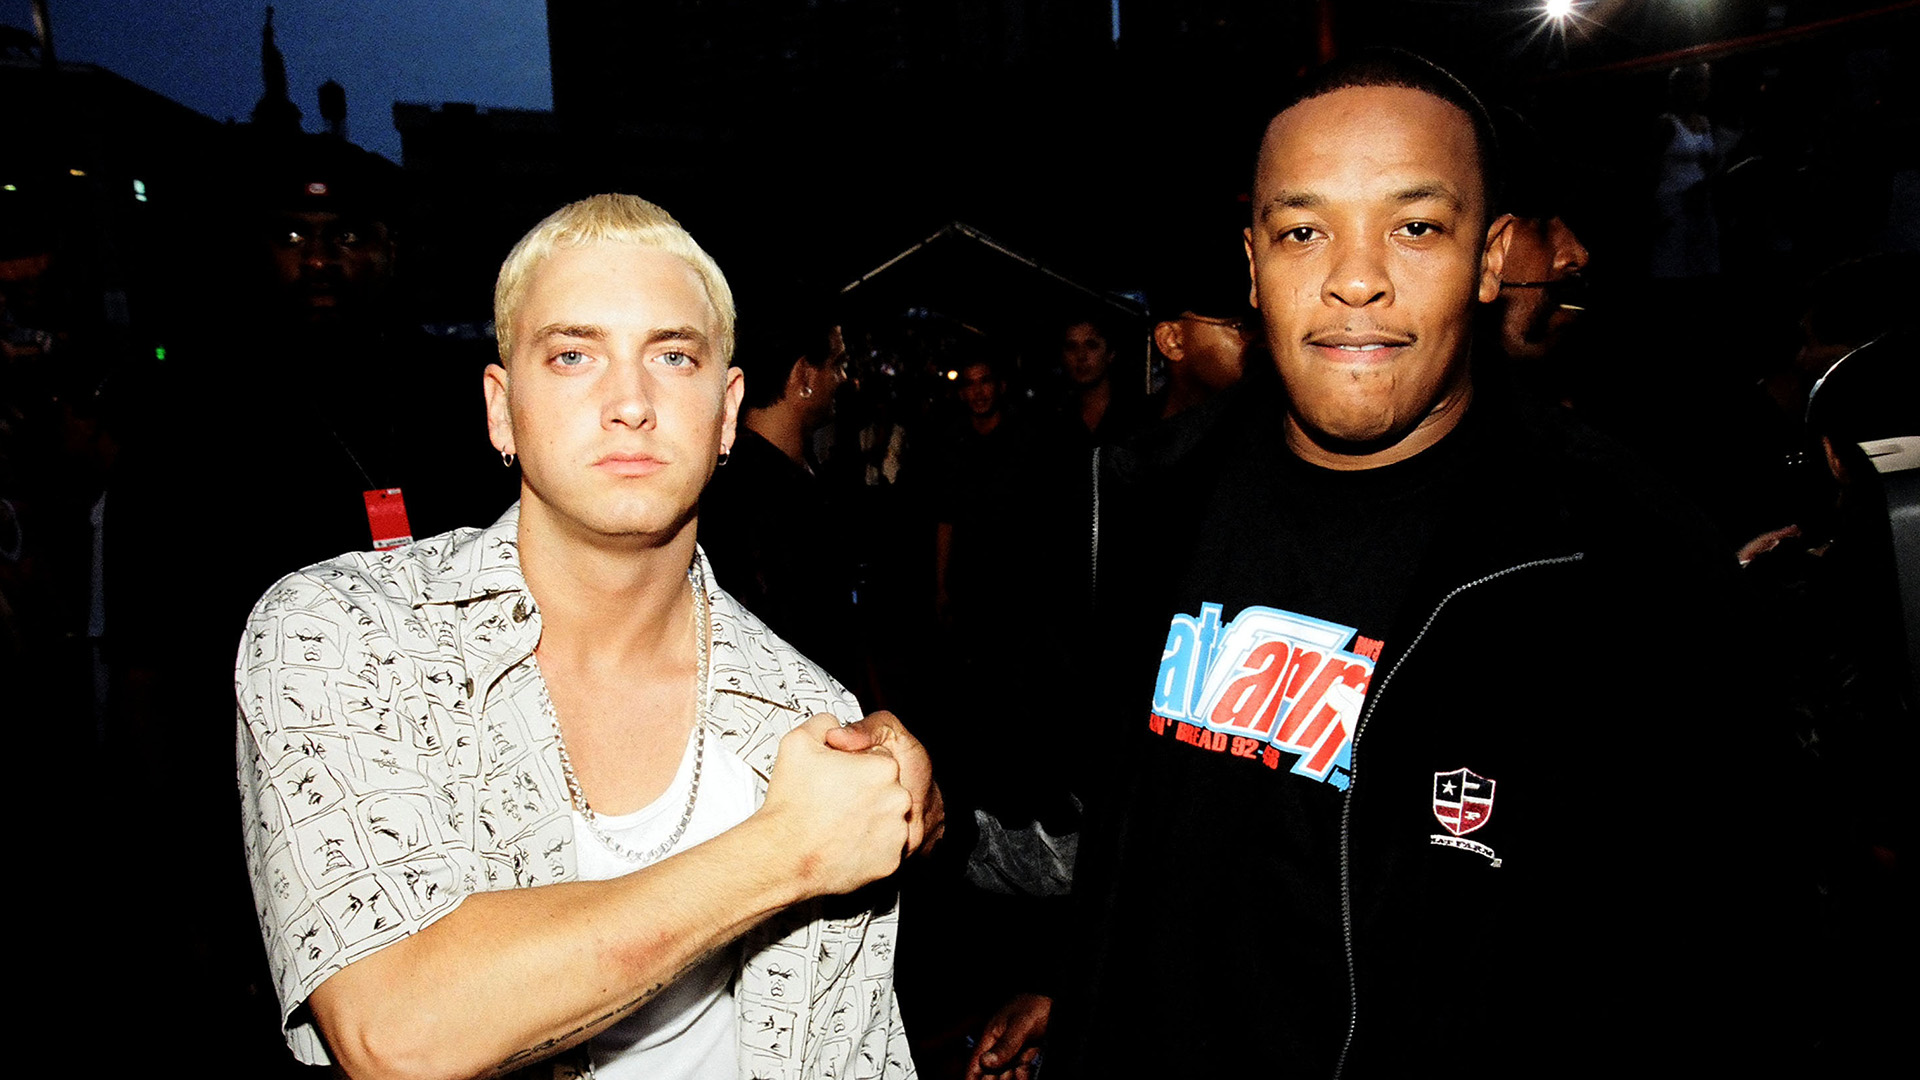 Eminem and Dr. Dre during 1999 MTV Music Awards Party at Lincoln Center in New York City, New York, United States.